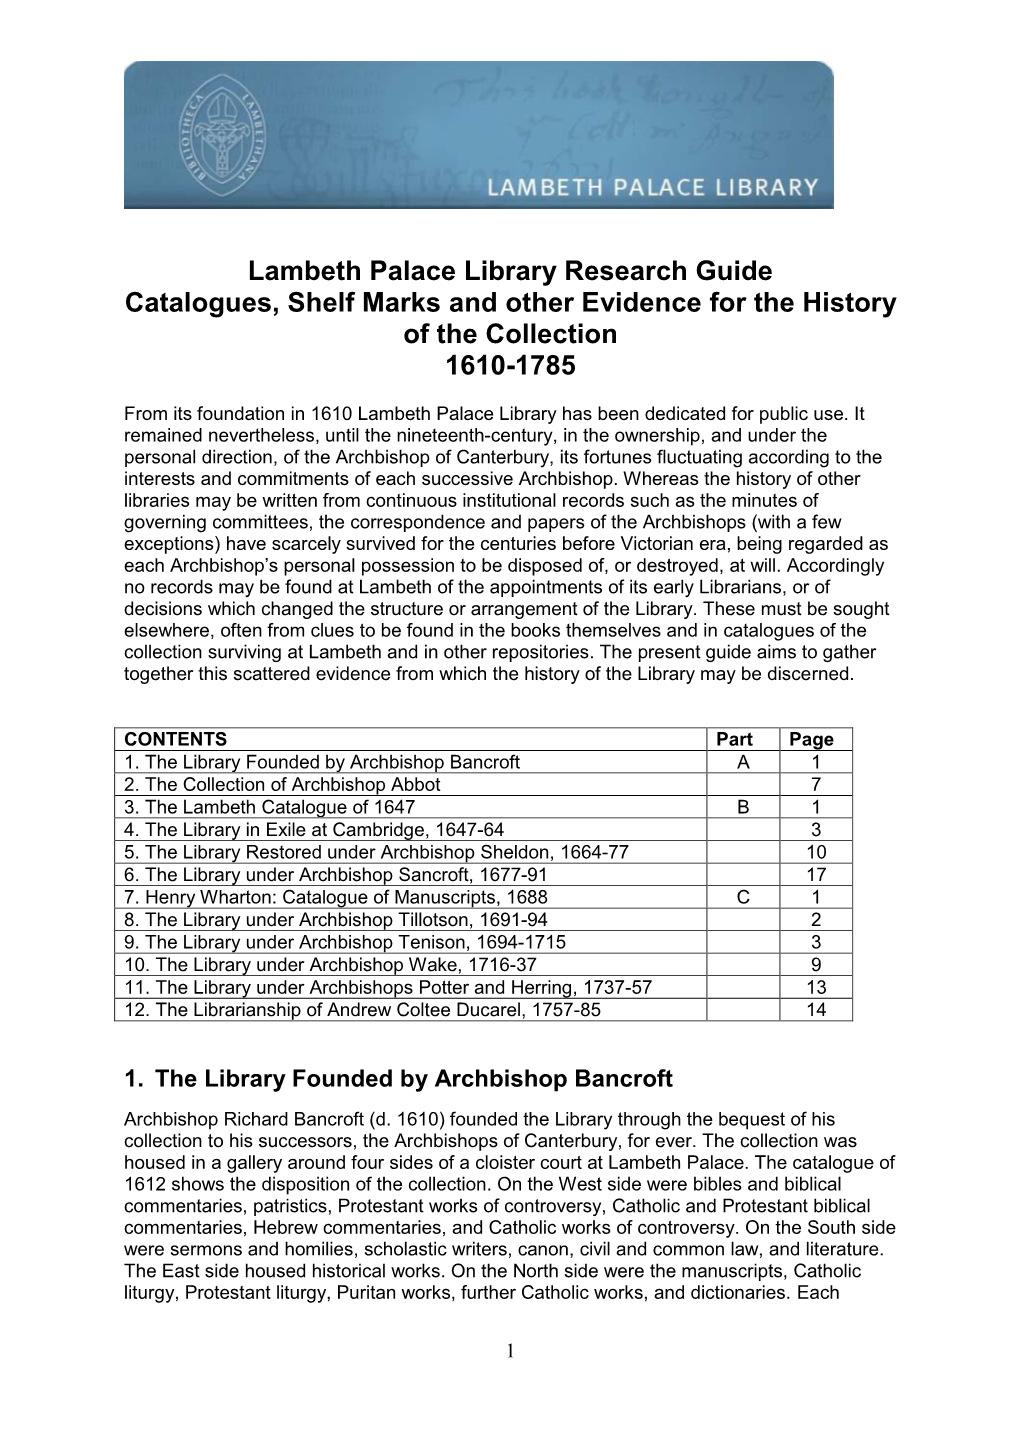 Lambeth Palace Library Research Guide Catalogues, Shelf Marks and Other Evidence for the History of the Collection 1610-1785